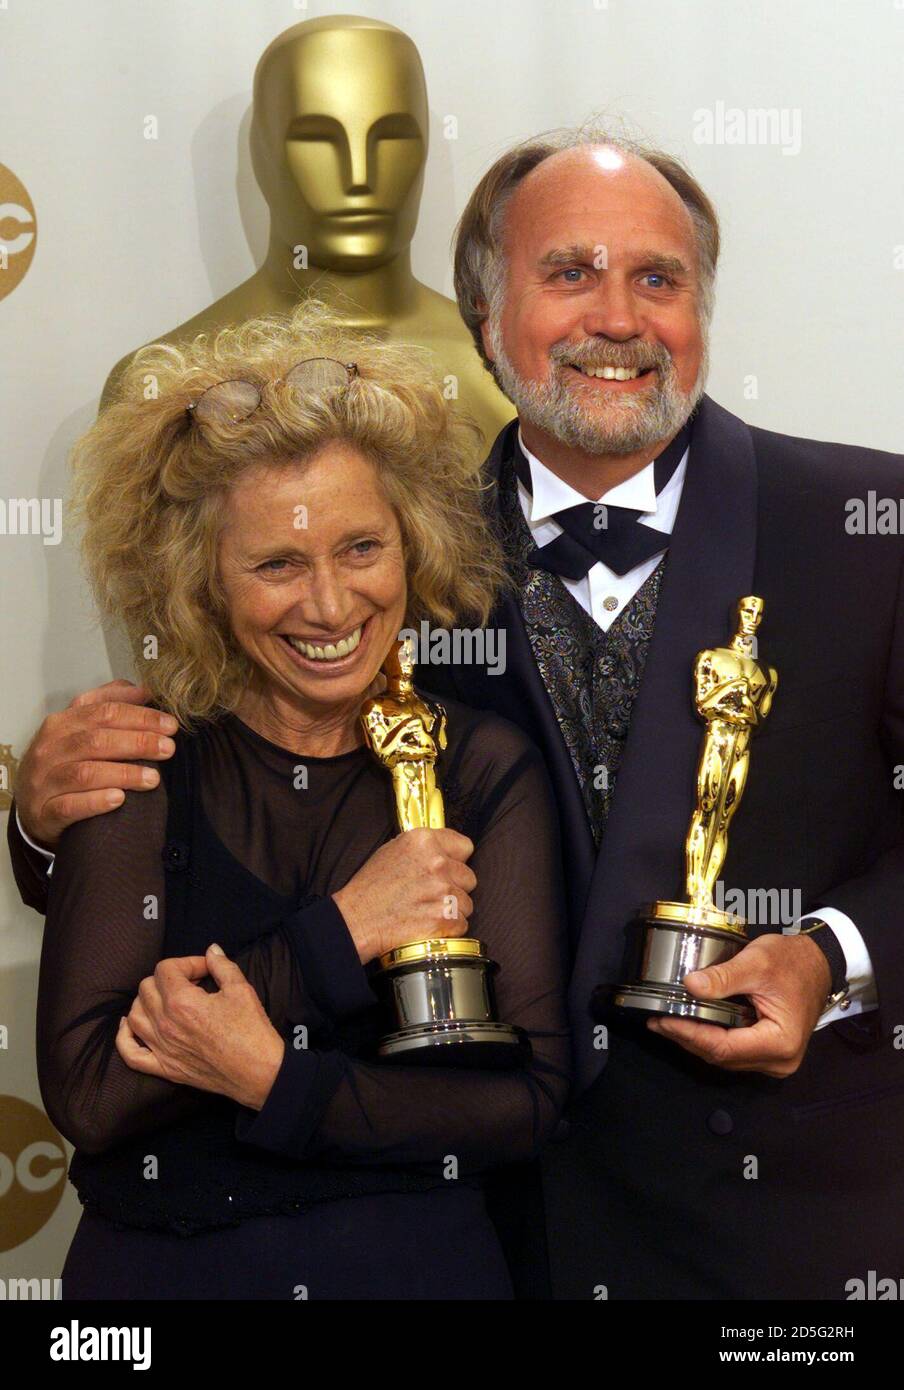 Susan Hannah Hadary and William A. Whiteford hold their Oscars after winning the award for Best Documentary Short Subject for 'King Gimp,' at the 72nd Annual Academy Awards at the Shrine Auditorium in Los Angeles March 26.  LD/HB Stock Photo